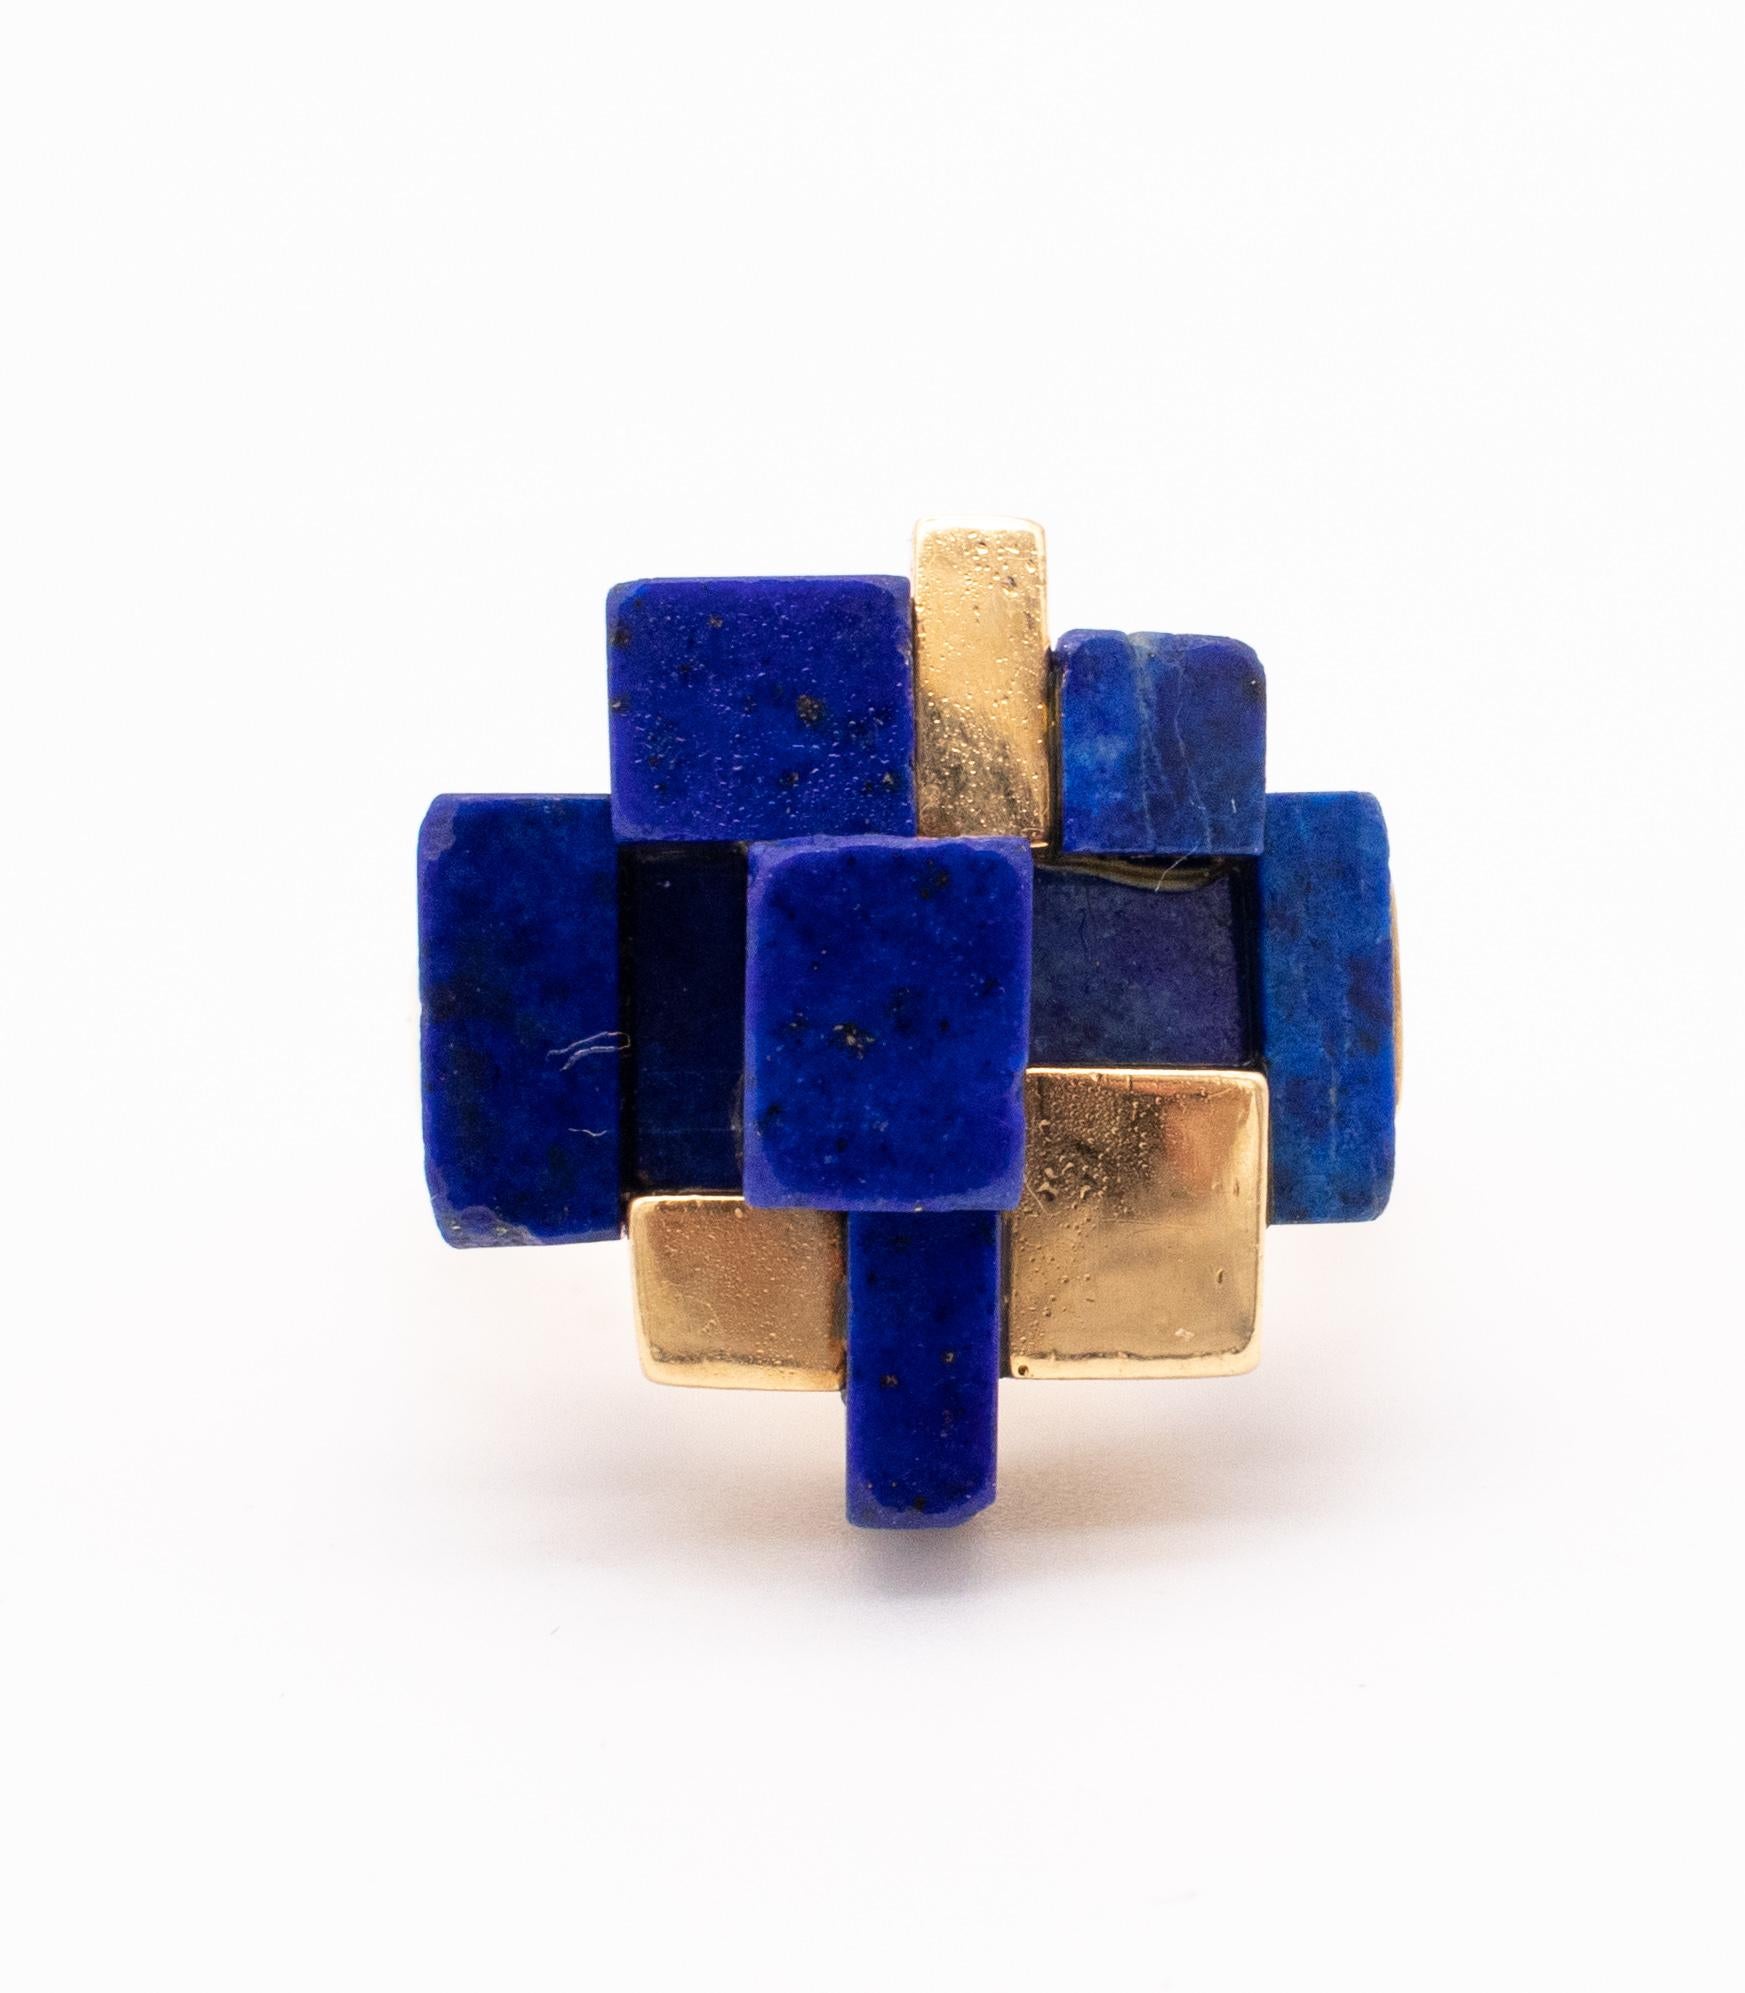 Mellerio 1970 Paris Rare Geometric 18Kt Yellow Gold Ring With Carved Lapis Lazul 4